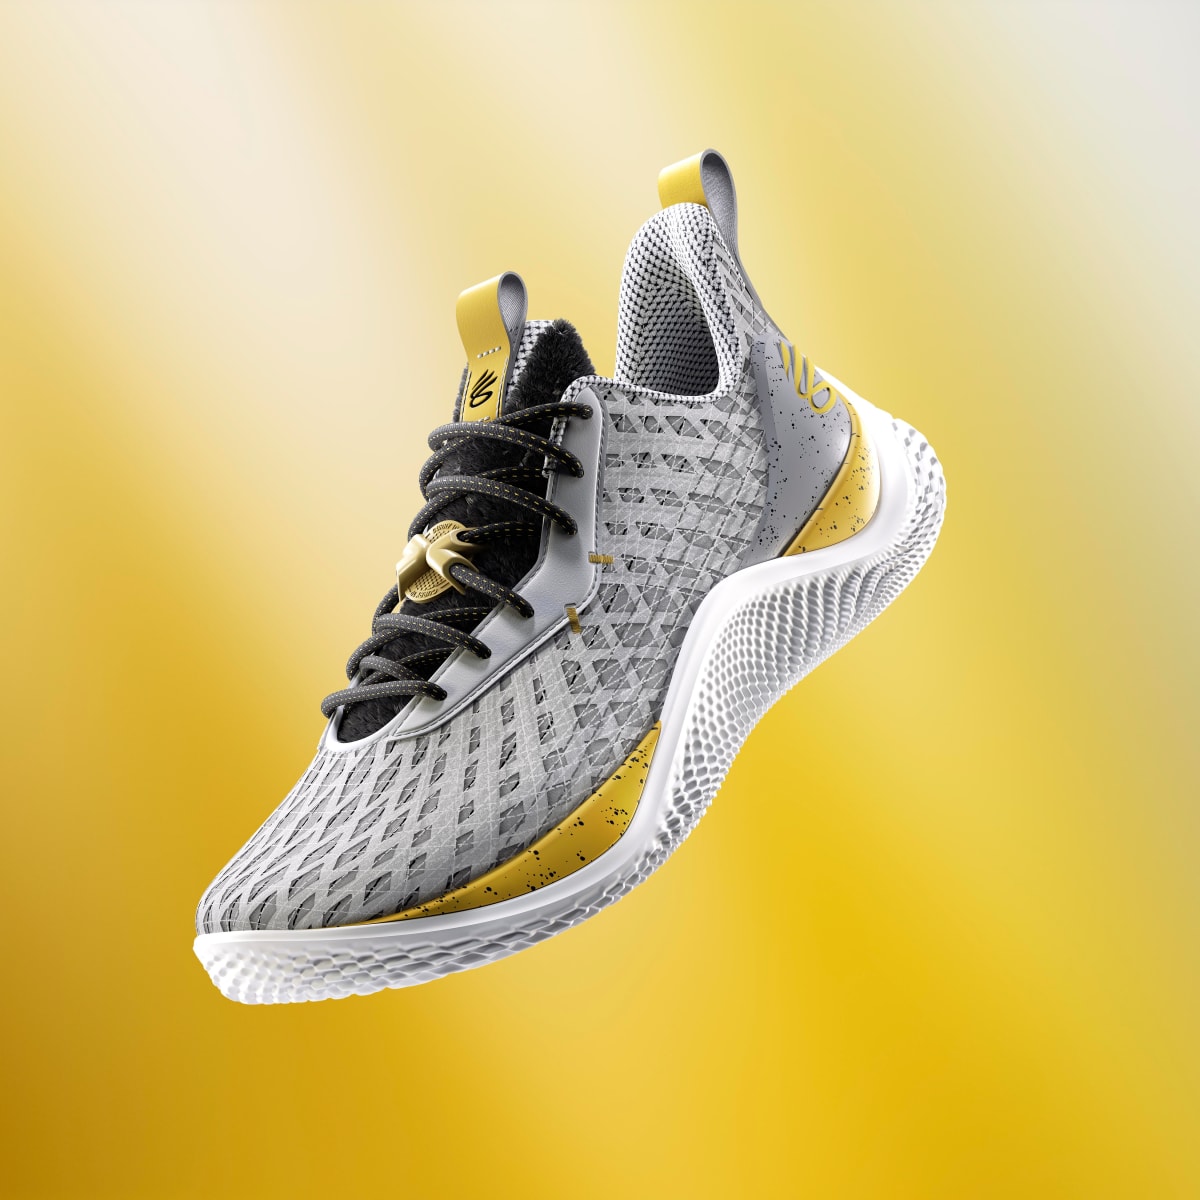 PHOTOS: Stephen Curry shoes this season